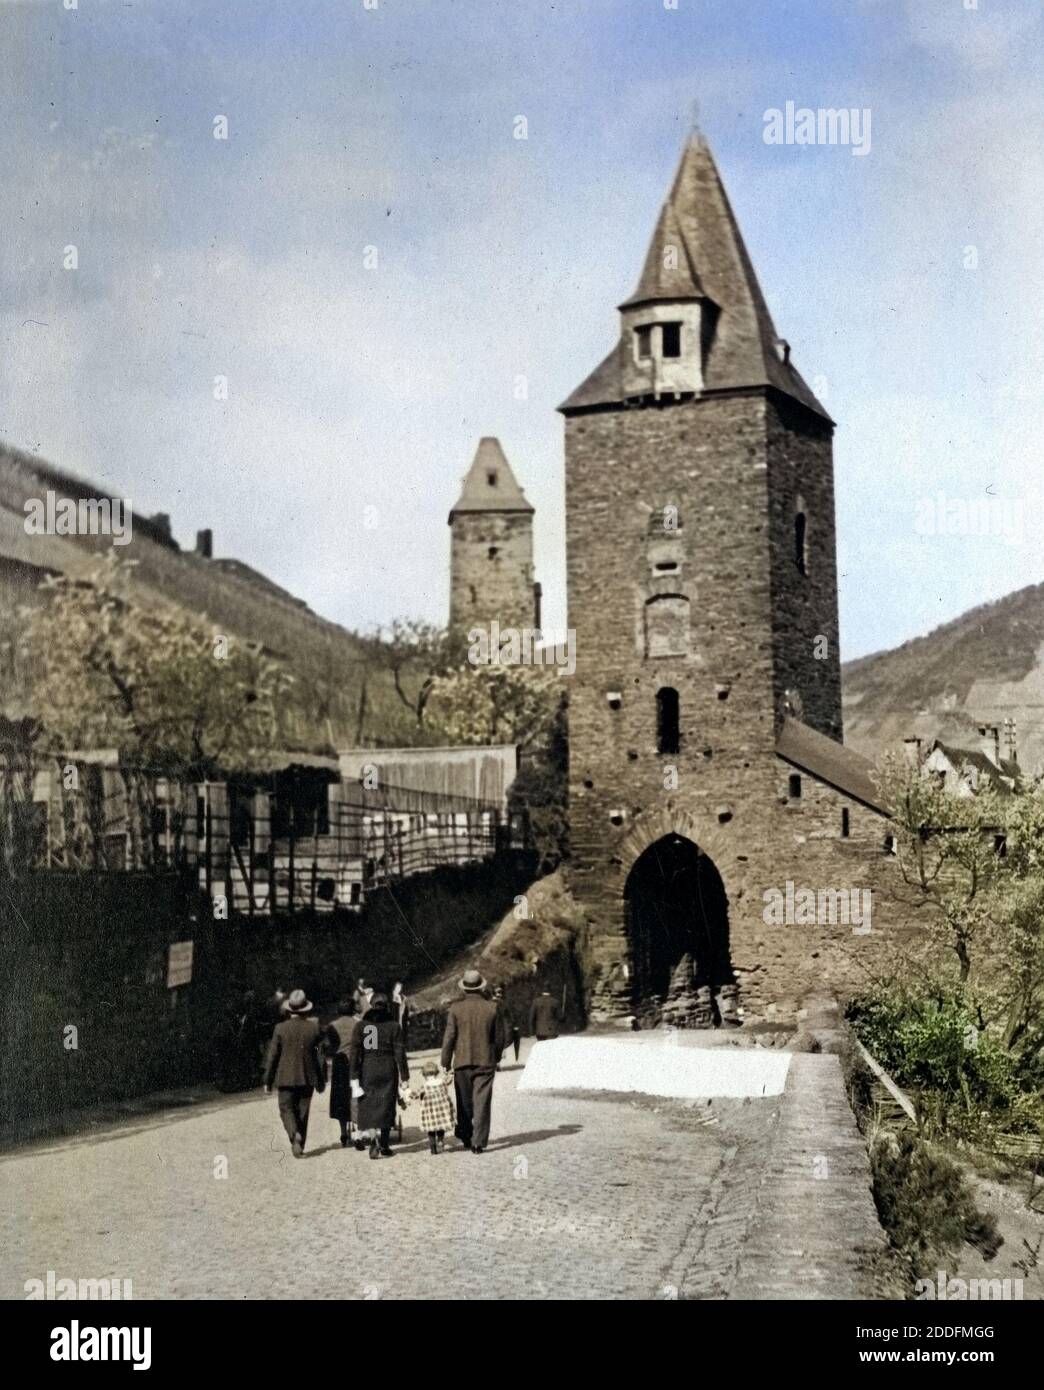 Am Steegertor in Bacharach, Deutschland 1930er Jahre. At Steegertor gate in Bacharach, Germany 1930s. Stock Photo